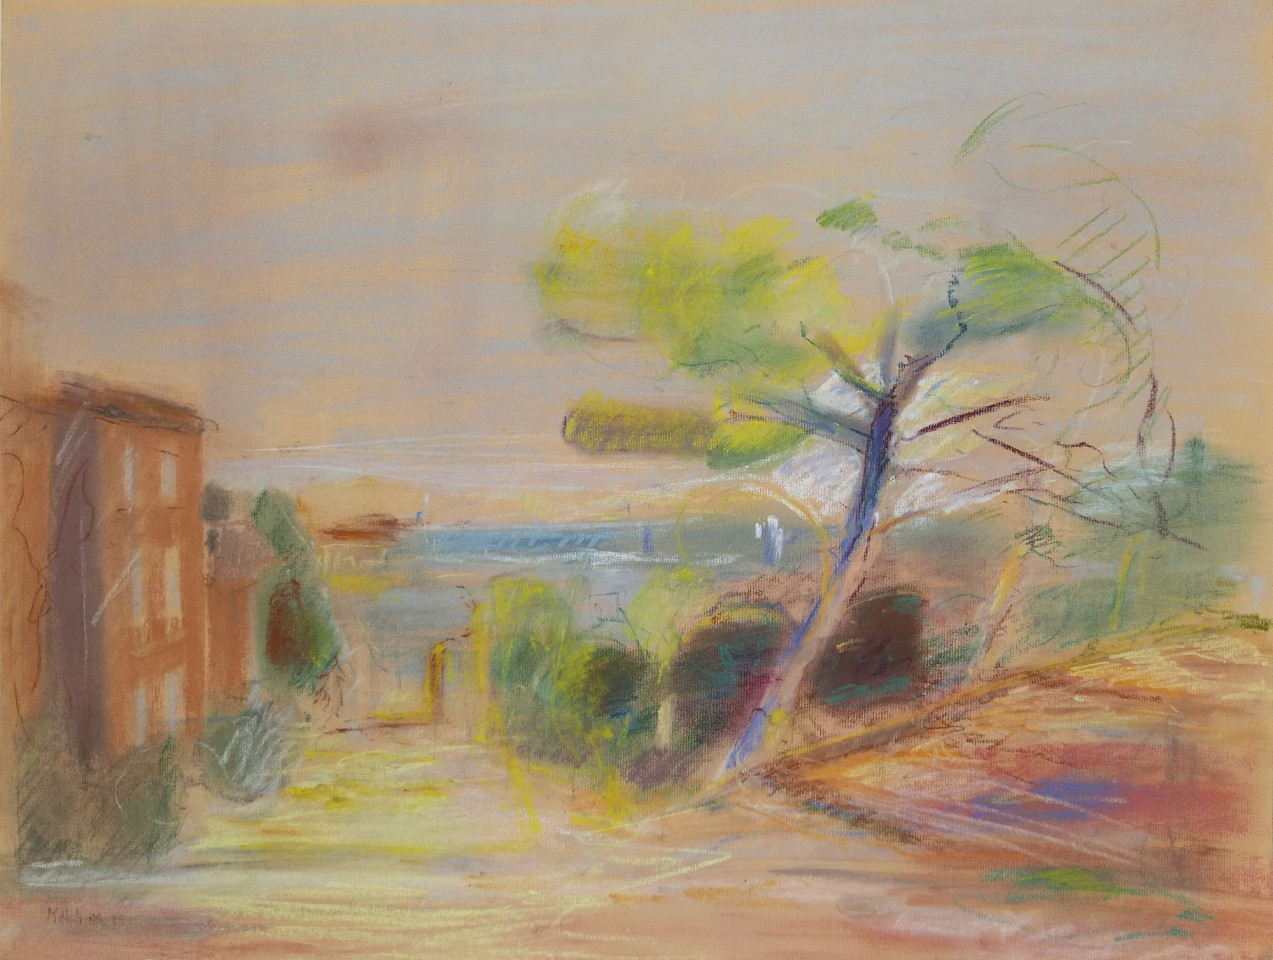 Isabelle Melchior, Grimaud, 2019
pastel on paper, 25 5/8" x 19 3/4" 
IM 1306
Price Upon Request